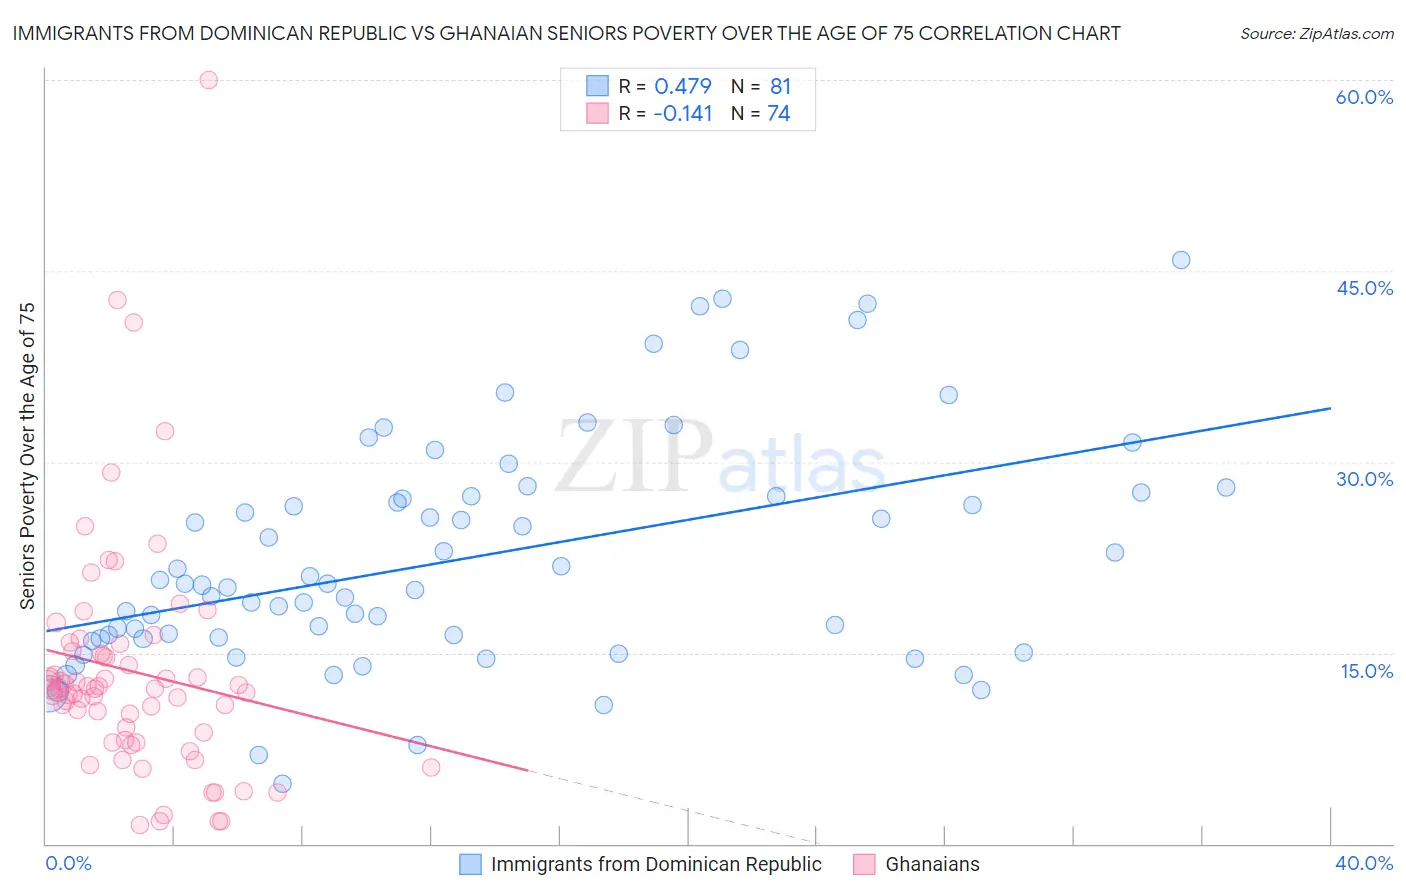 Immigrants from Dominican Republic vs Ghanaian Seniors Poverty Over the Age of 75